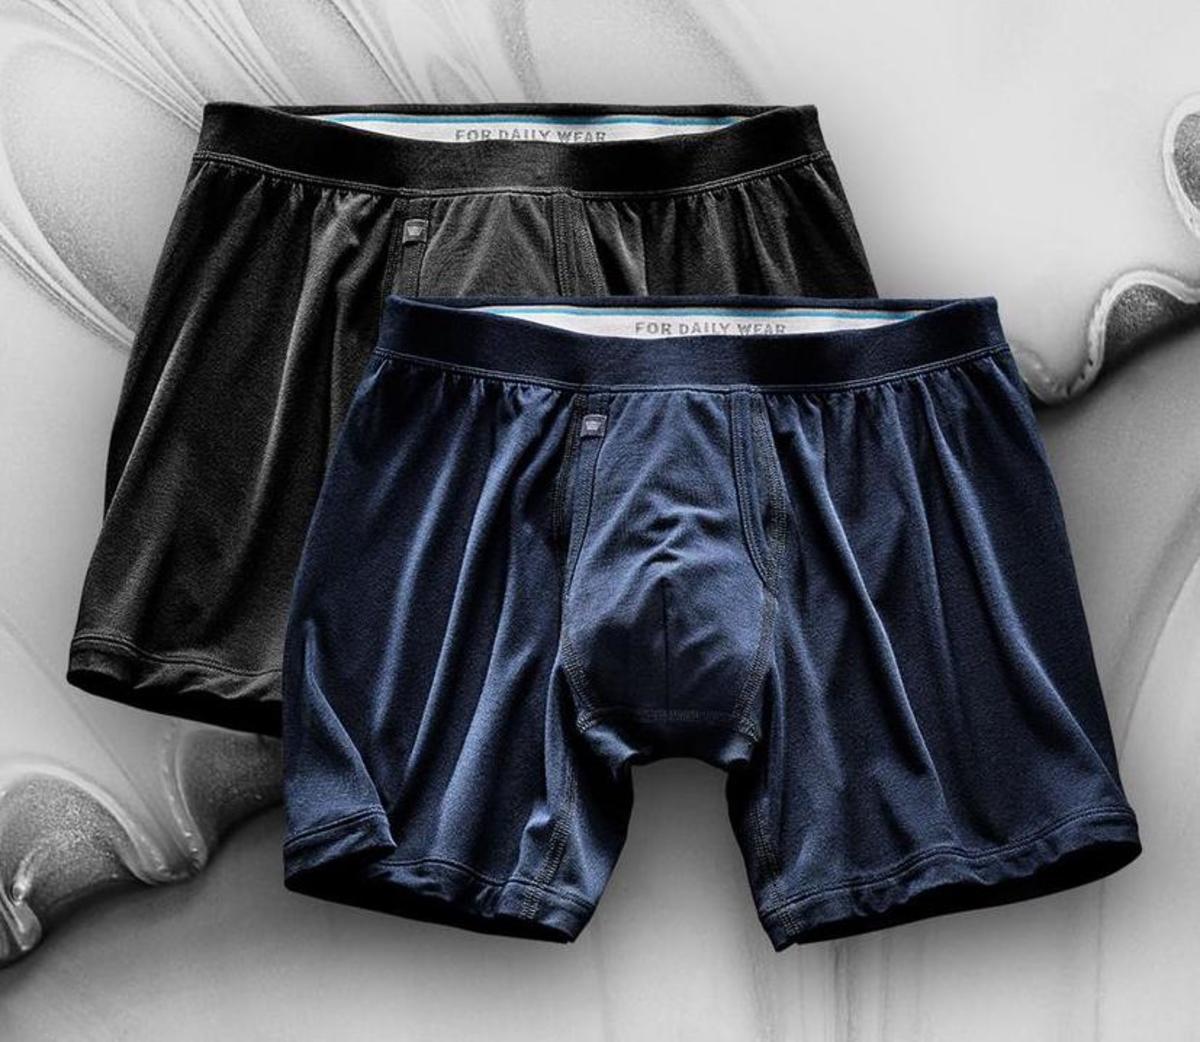 Mack Weldon's Silver Boxers get a luxurious upgrade - Acquire